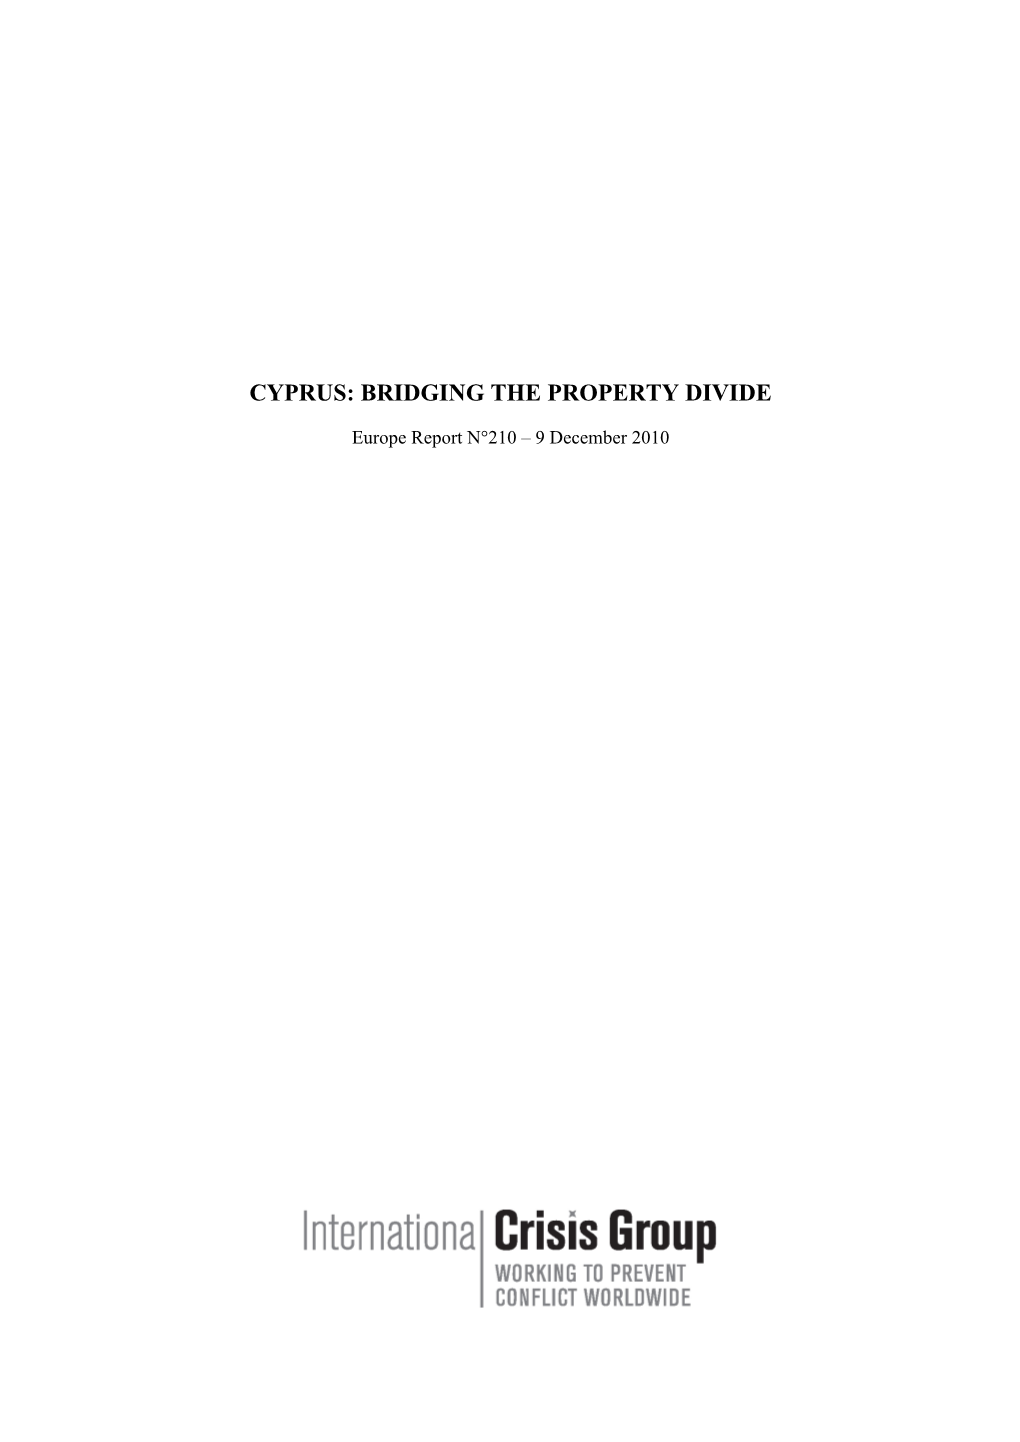 Cyprus: Bridging the Property Divide